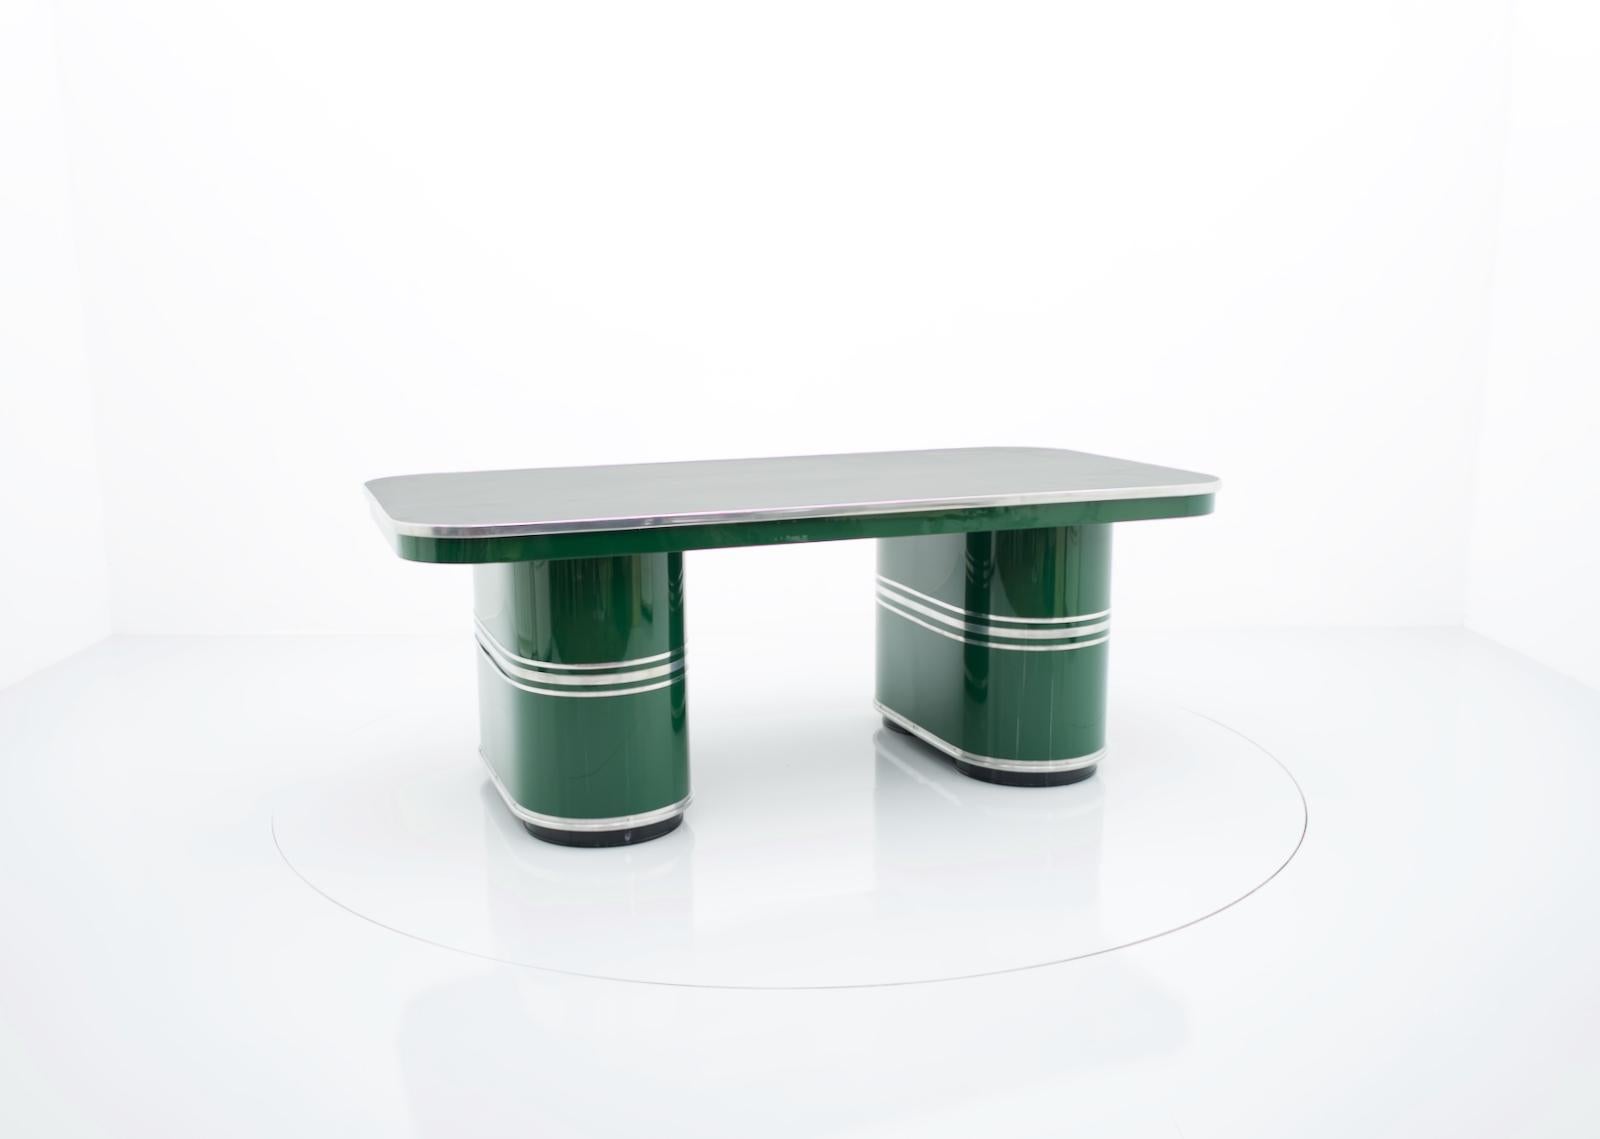 Mauser Rundform 'Berlin' Writing Desk in British Racing Green, Germany, 1950 For Sale 8